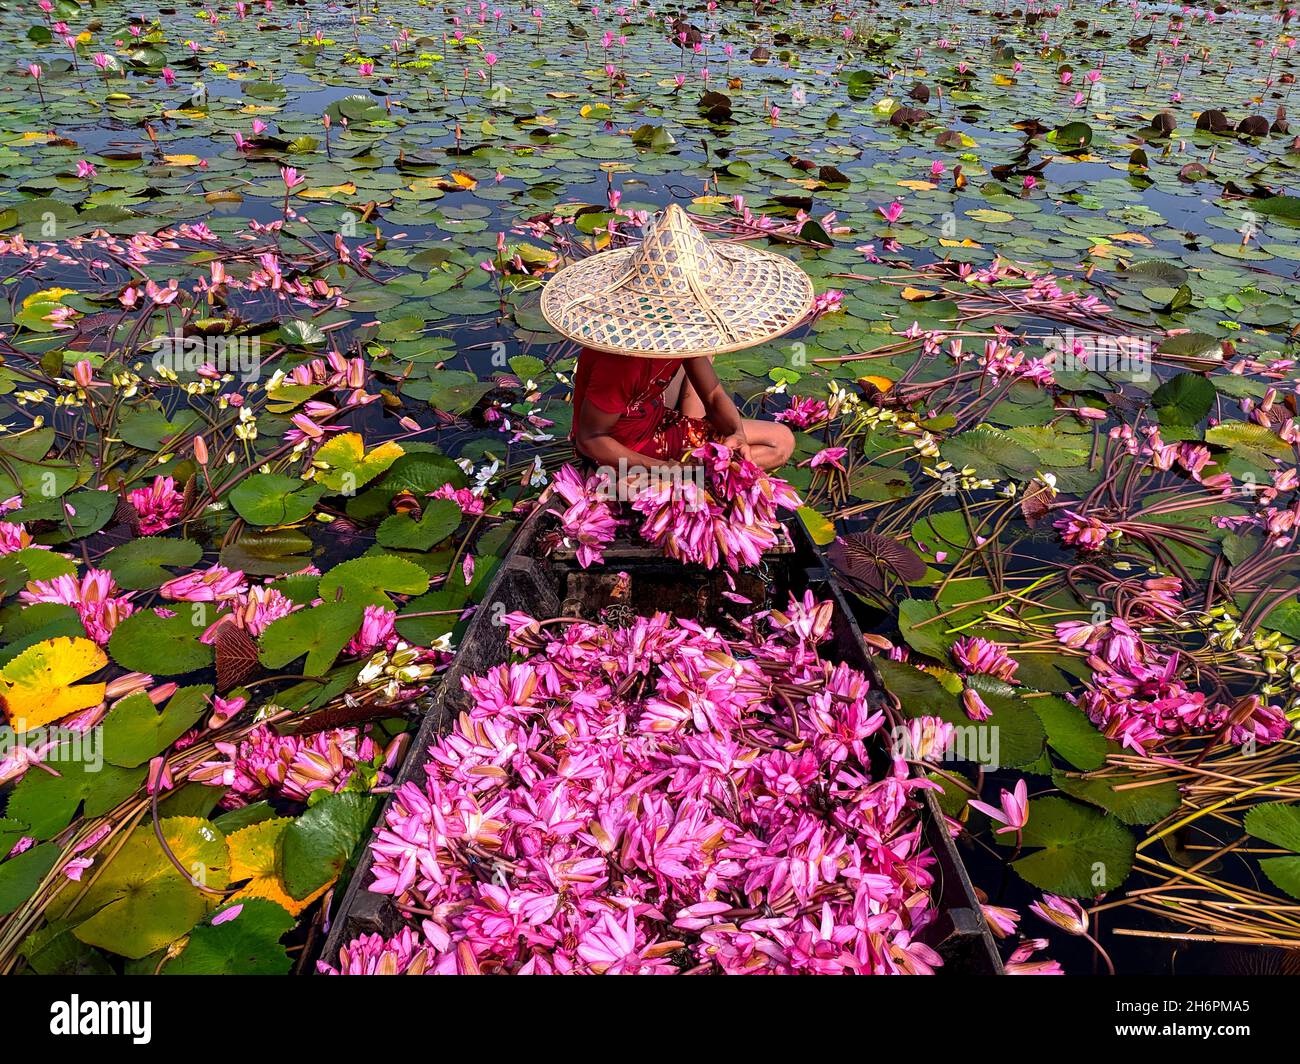 Barisal. 17th Nov, 2021. A boat loaded with red water lilies is seen in Barisal, Bangladesh, Nov. 16, 2021. Credit: Xinhua/Alamy Live News Stock Photo